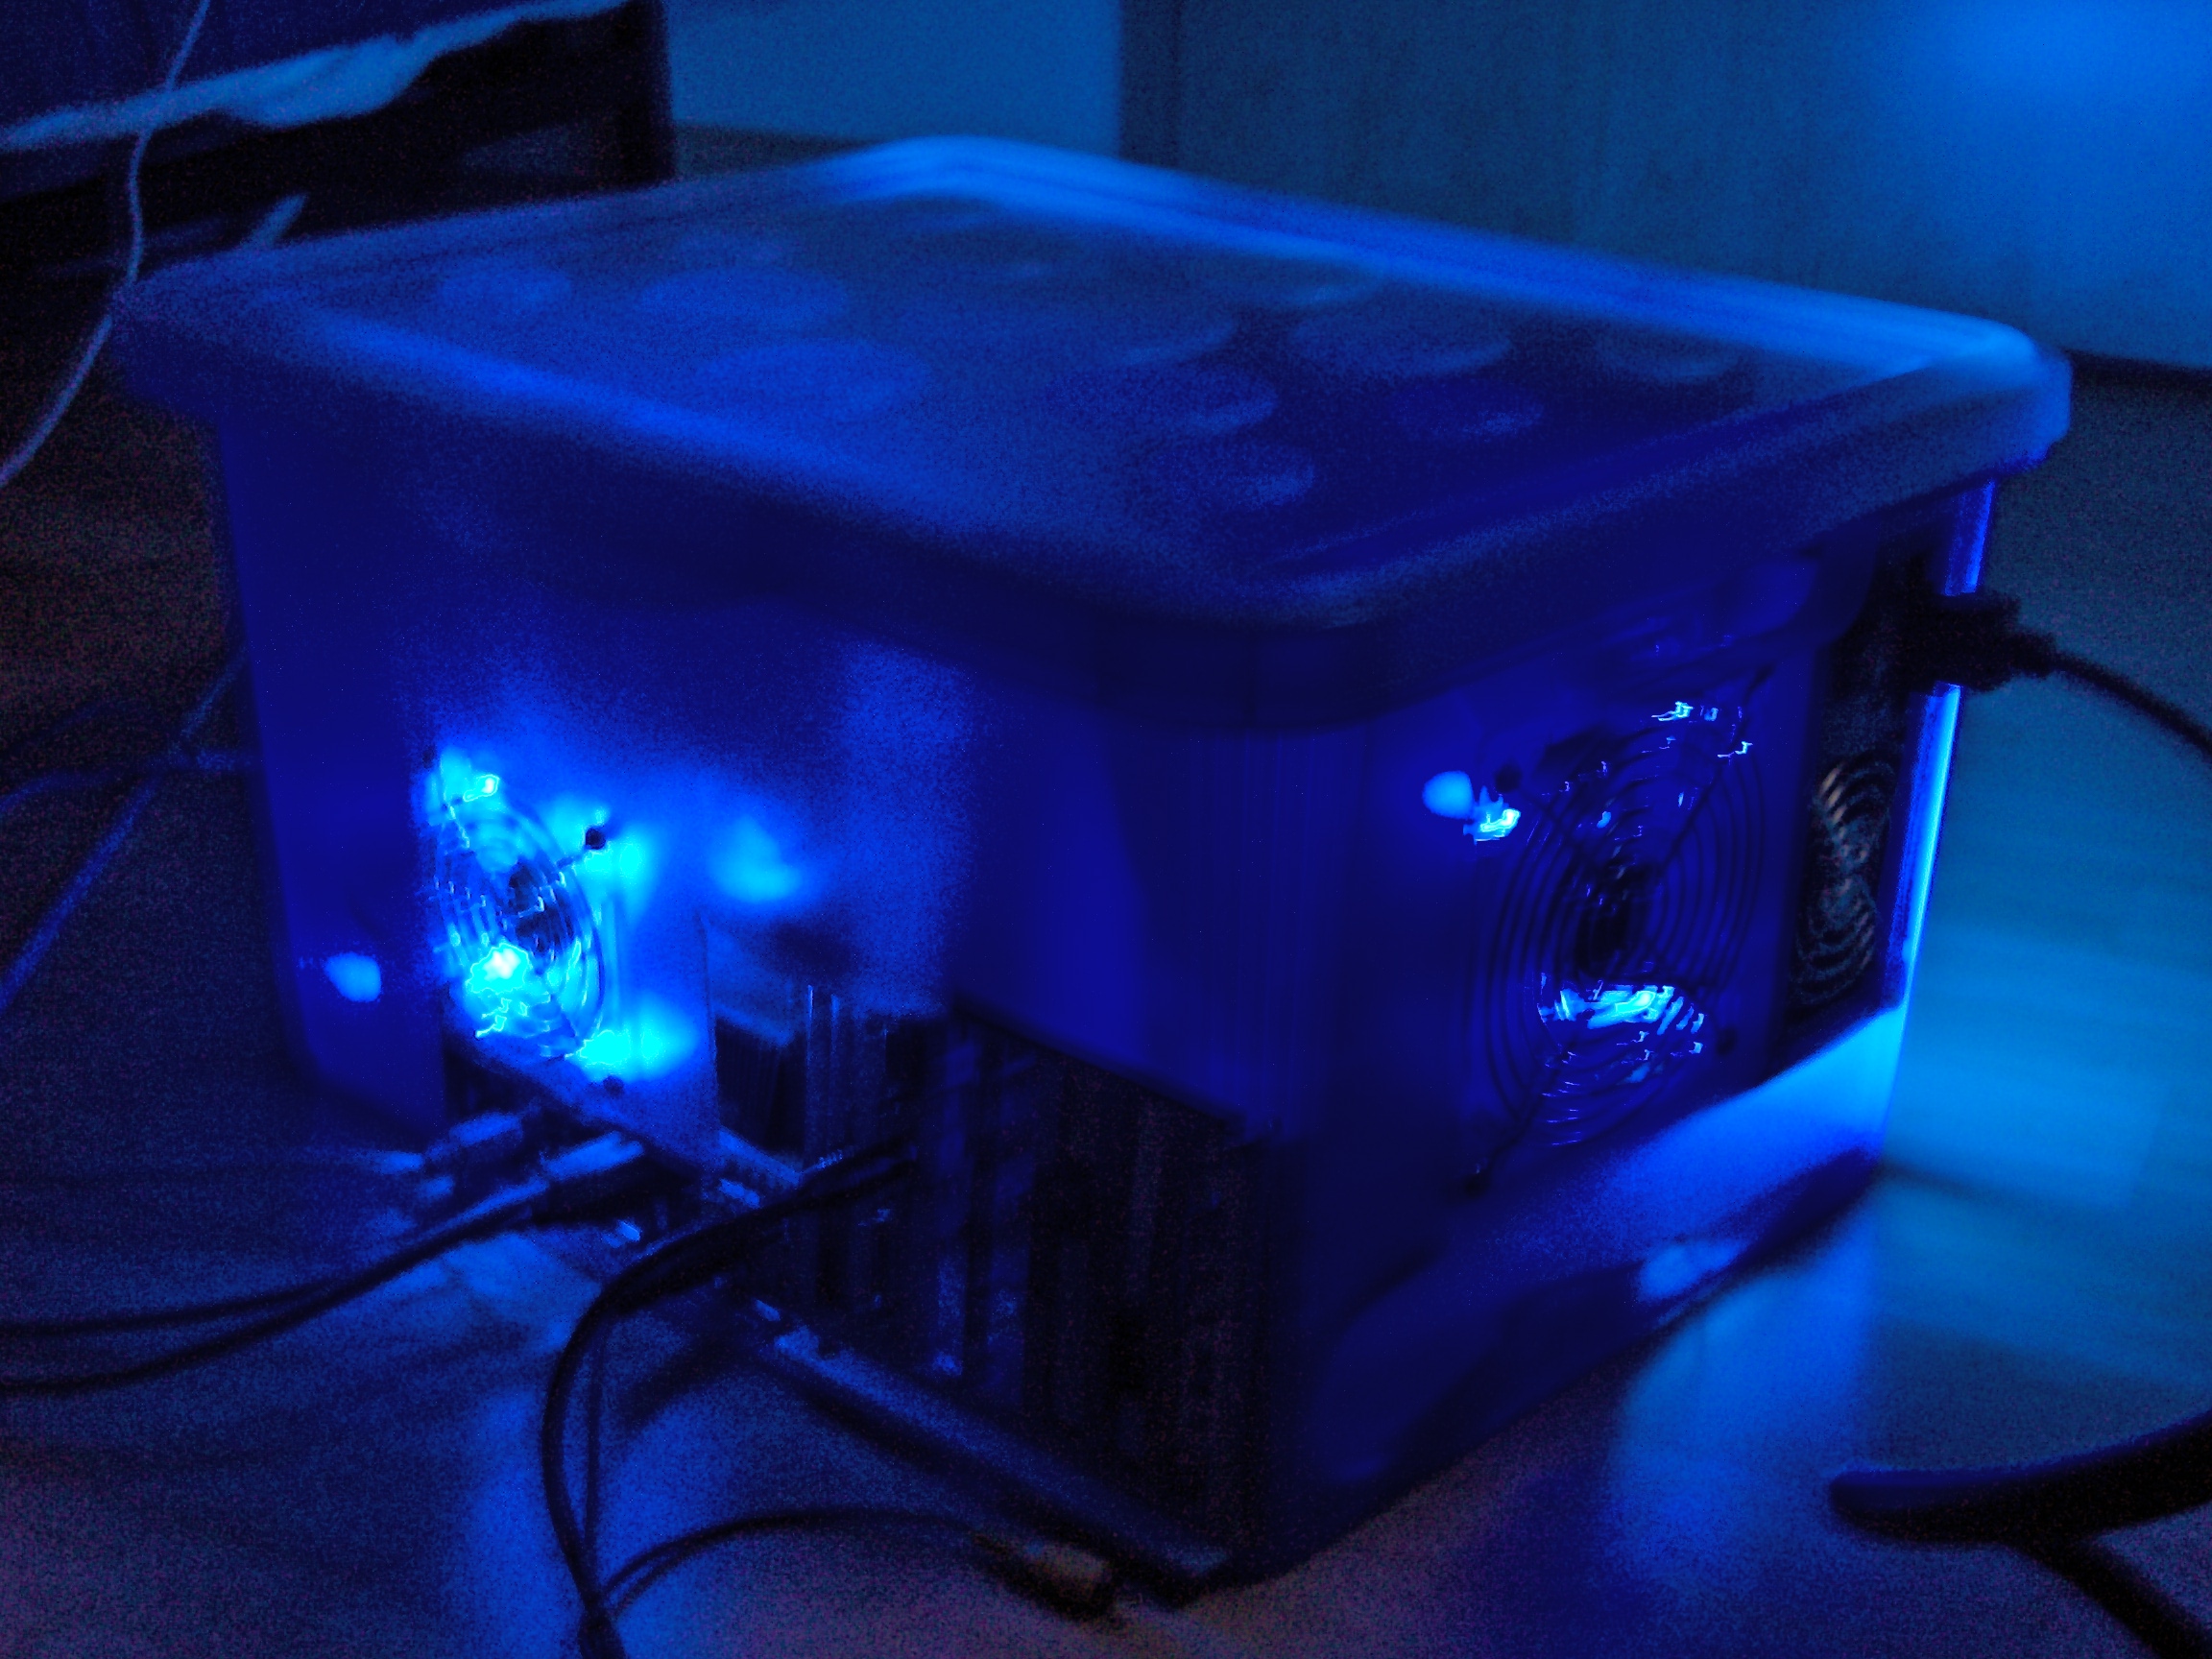 Glowing PC back and side